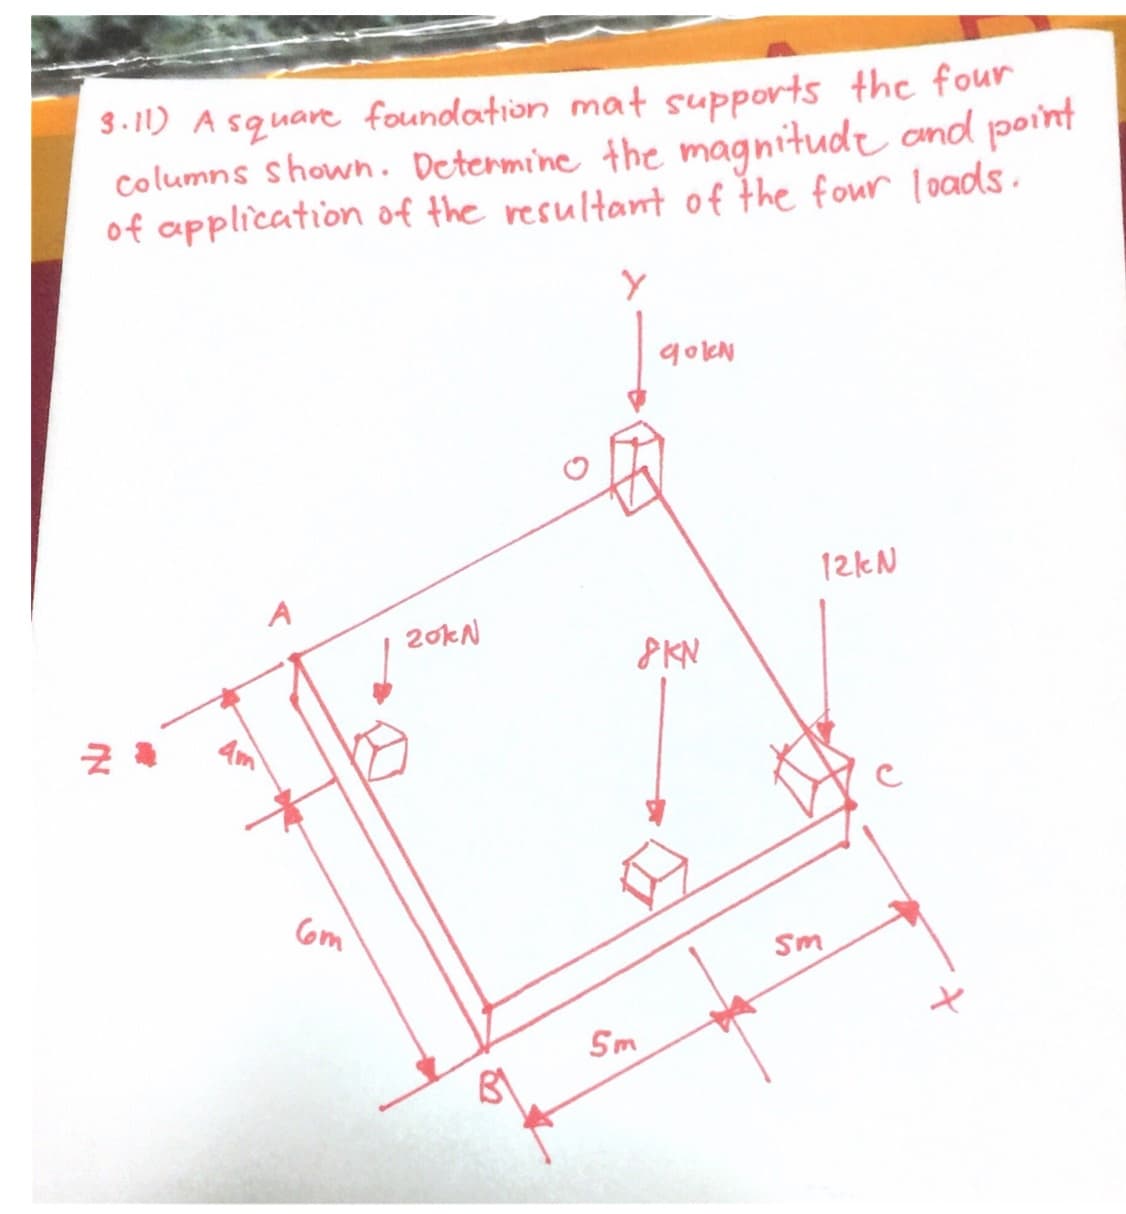 3-11) A squarefoundlation mat supports thc four
Columns shown. Determine the magnitudt ond point
of application of the resultant of the four loads
Y
goleh
12KN
A
20KN
PKN
Com
Sm
Sm
